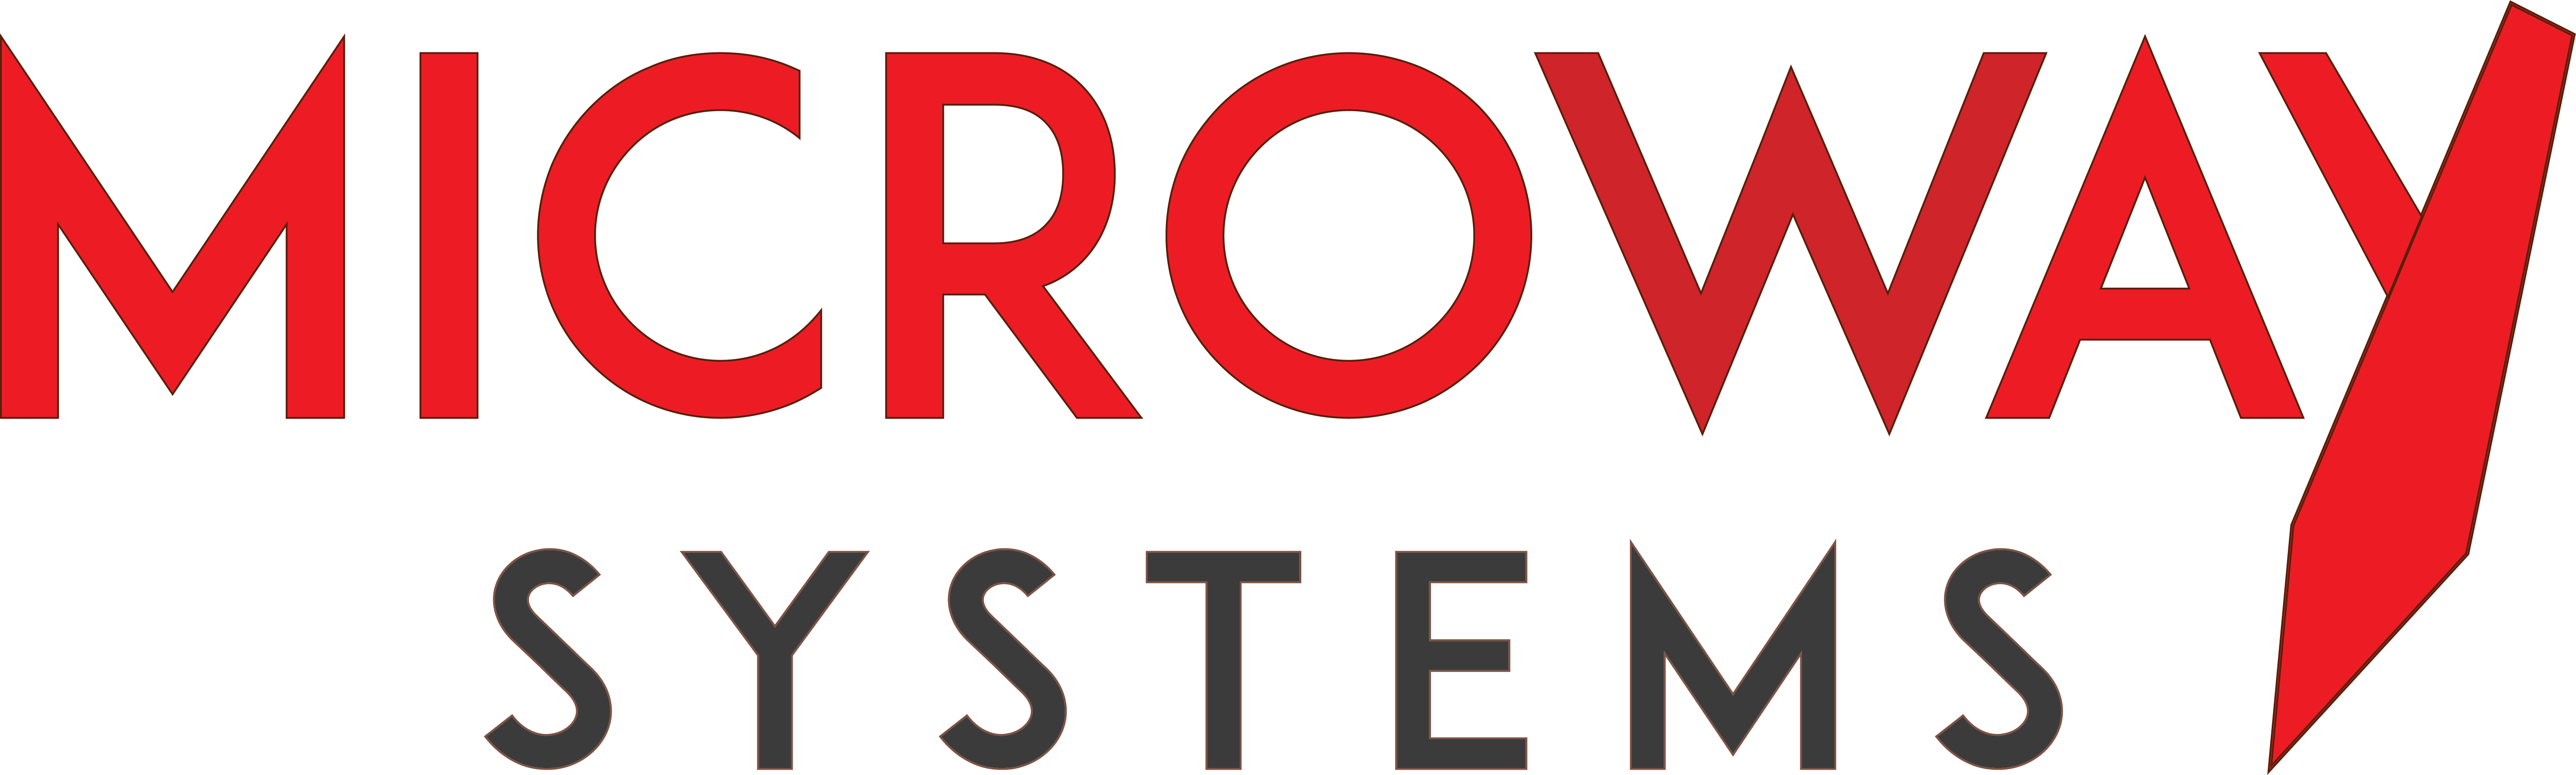 Microway Systems